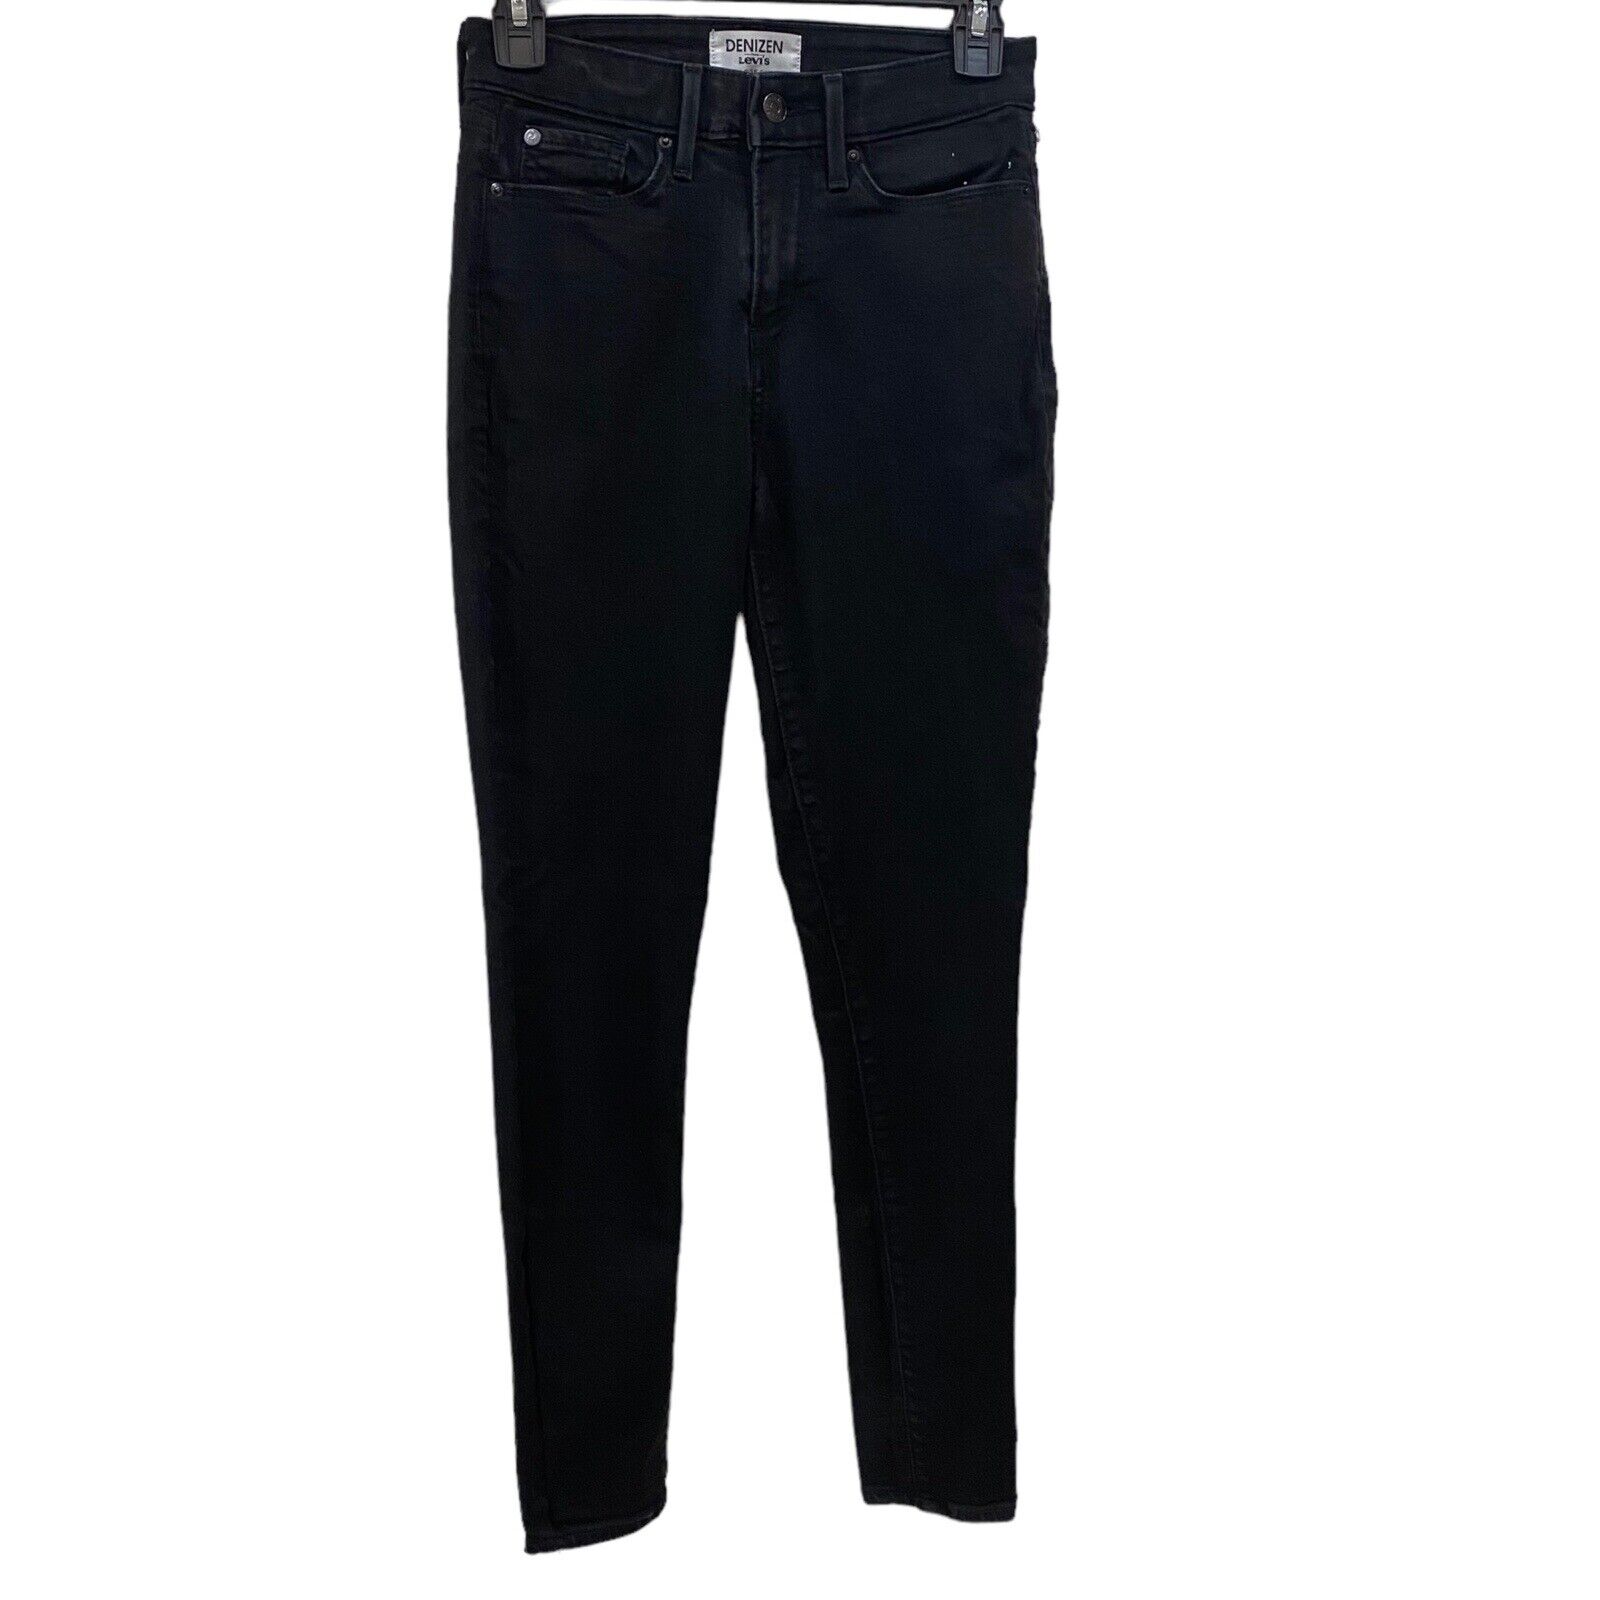 Denizen By Levi’s - High Rise Skinny Jeans - image 1